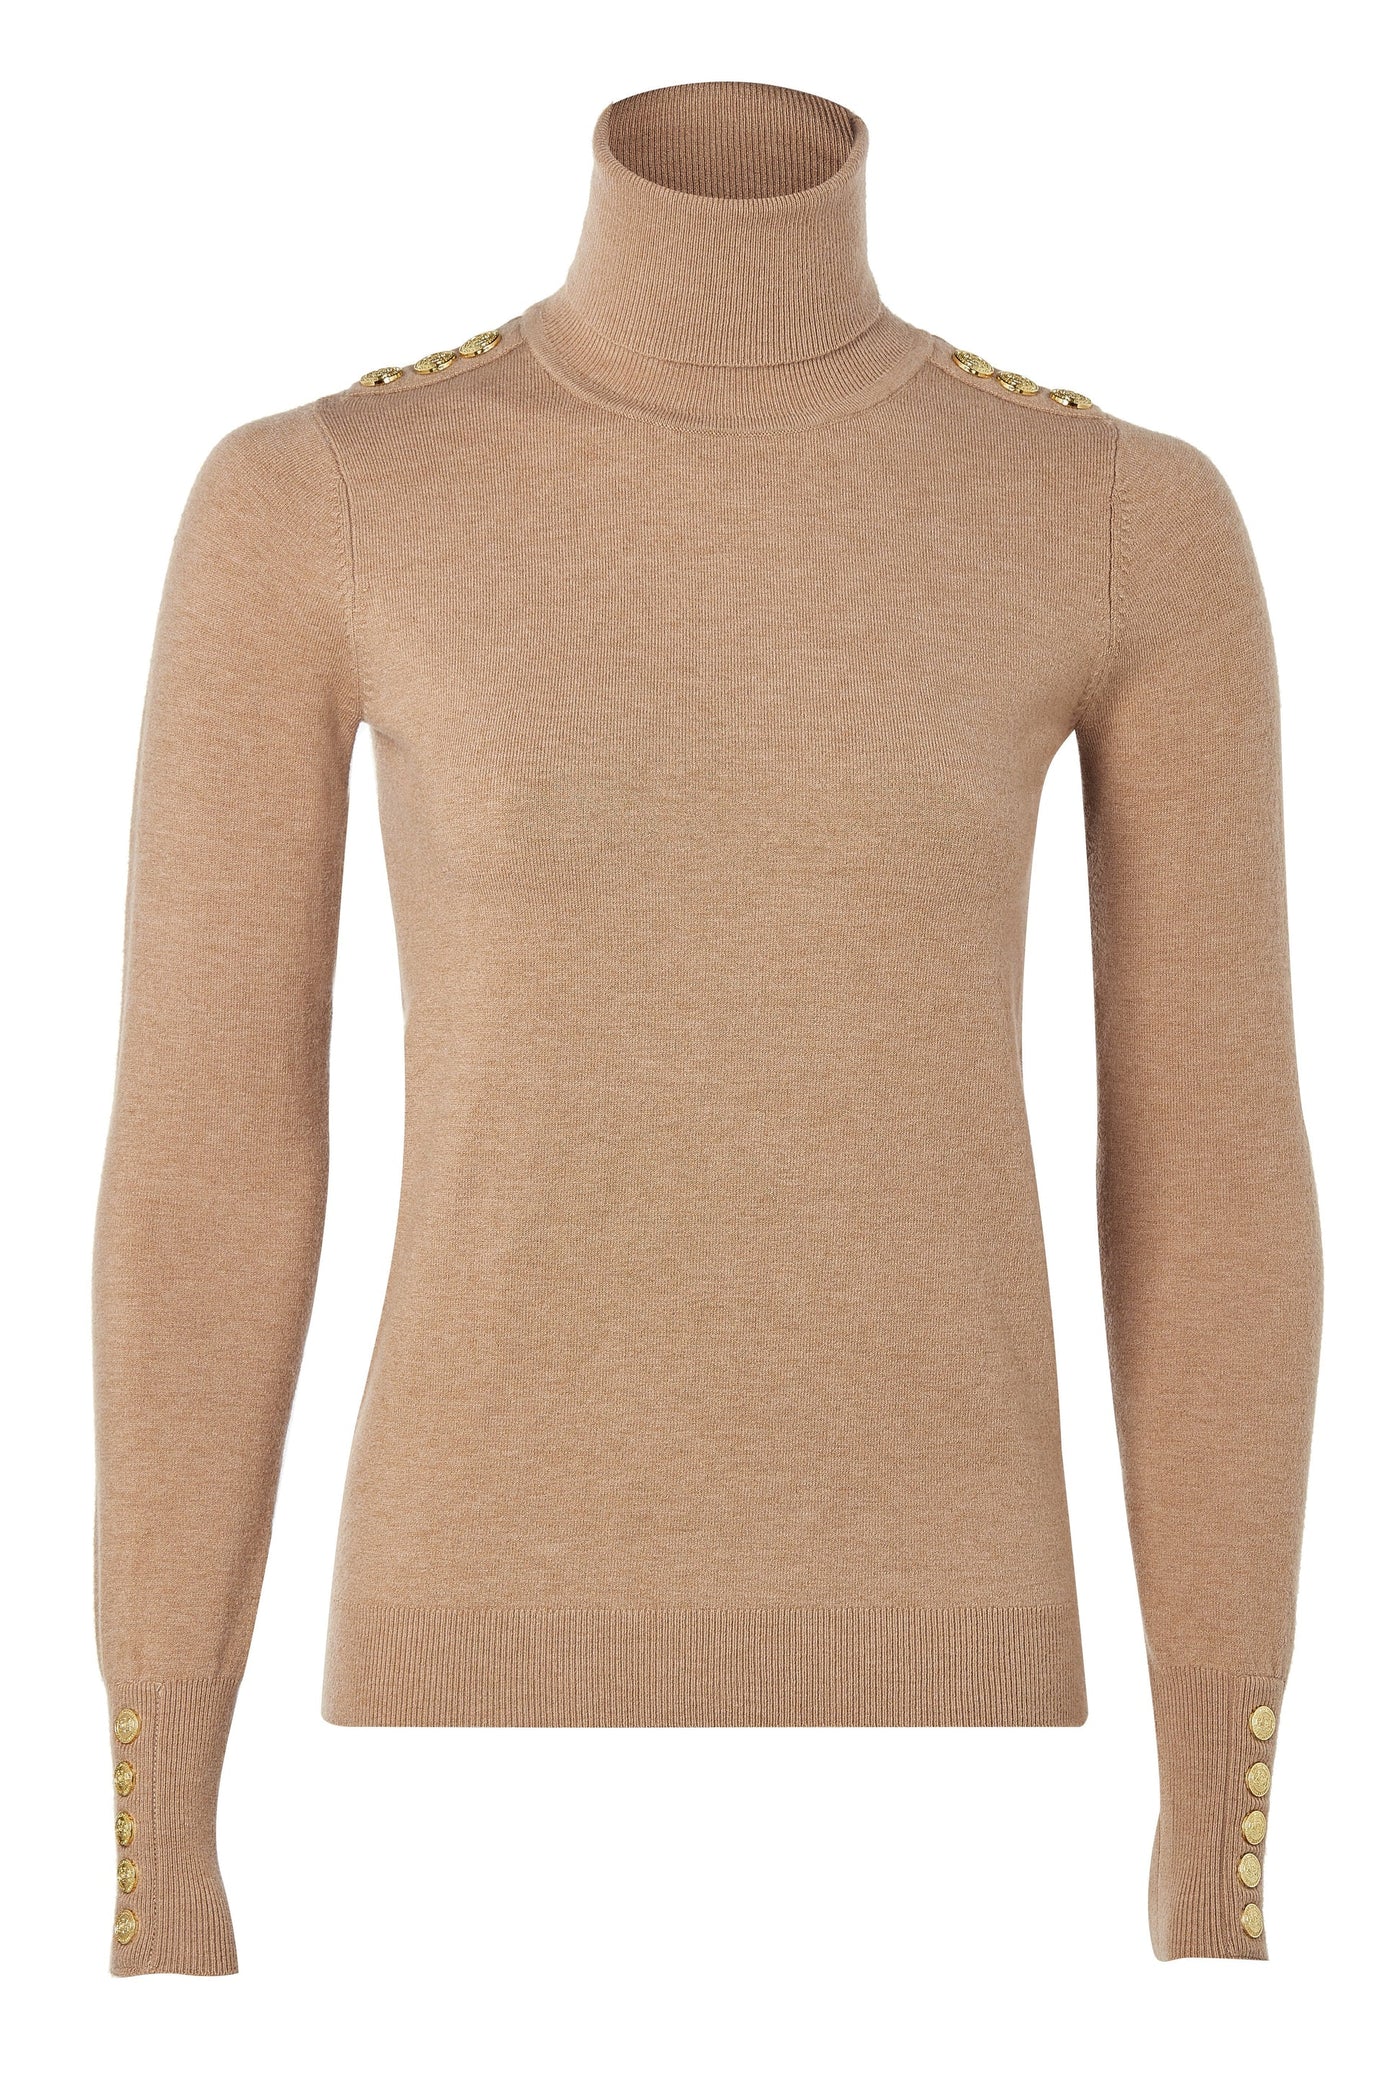 Holland Cooper Buttoned Knit Roll Neck Ladies Knitwear in Dark Camel